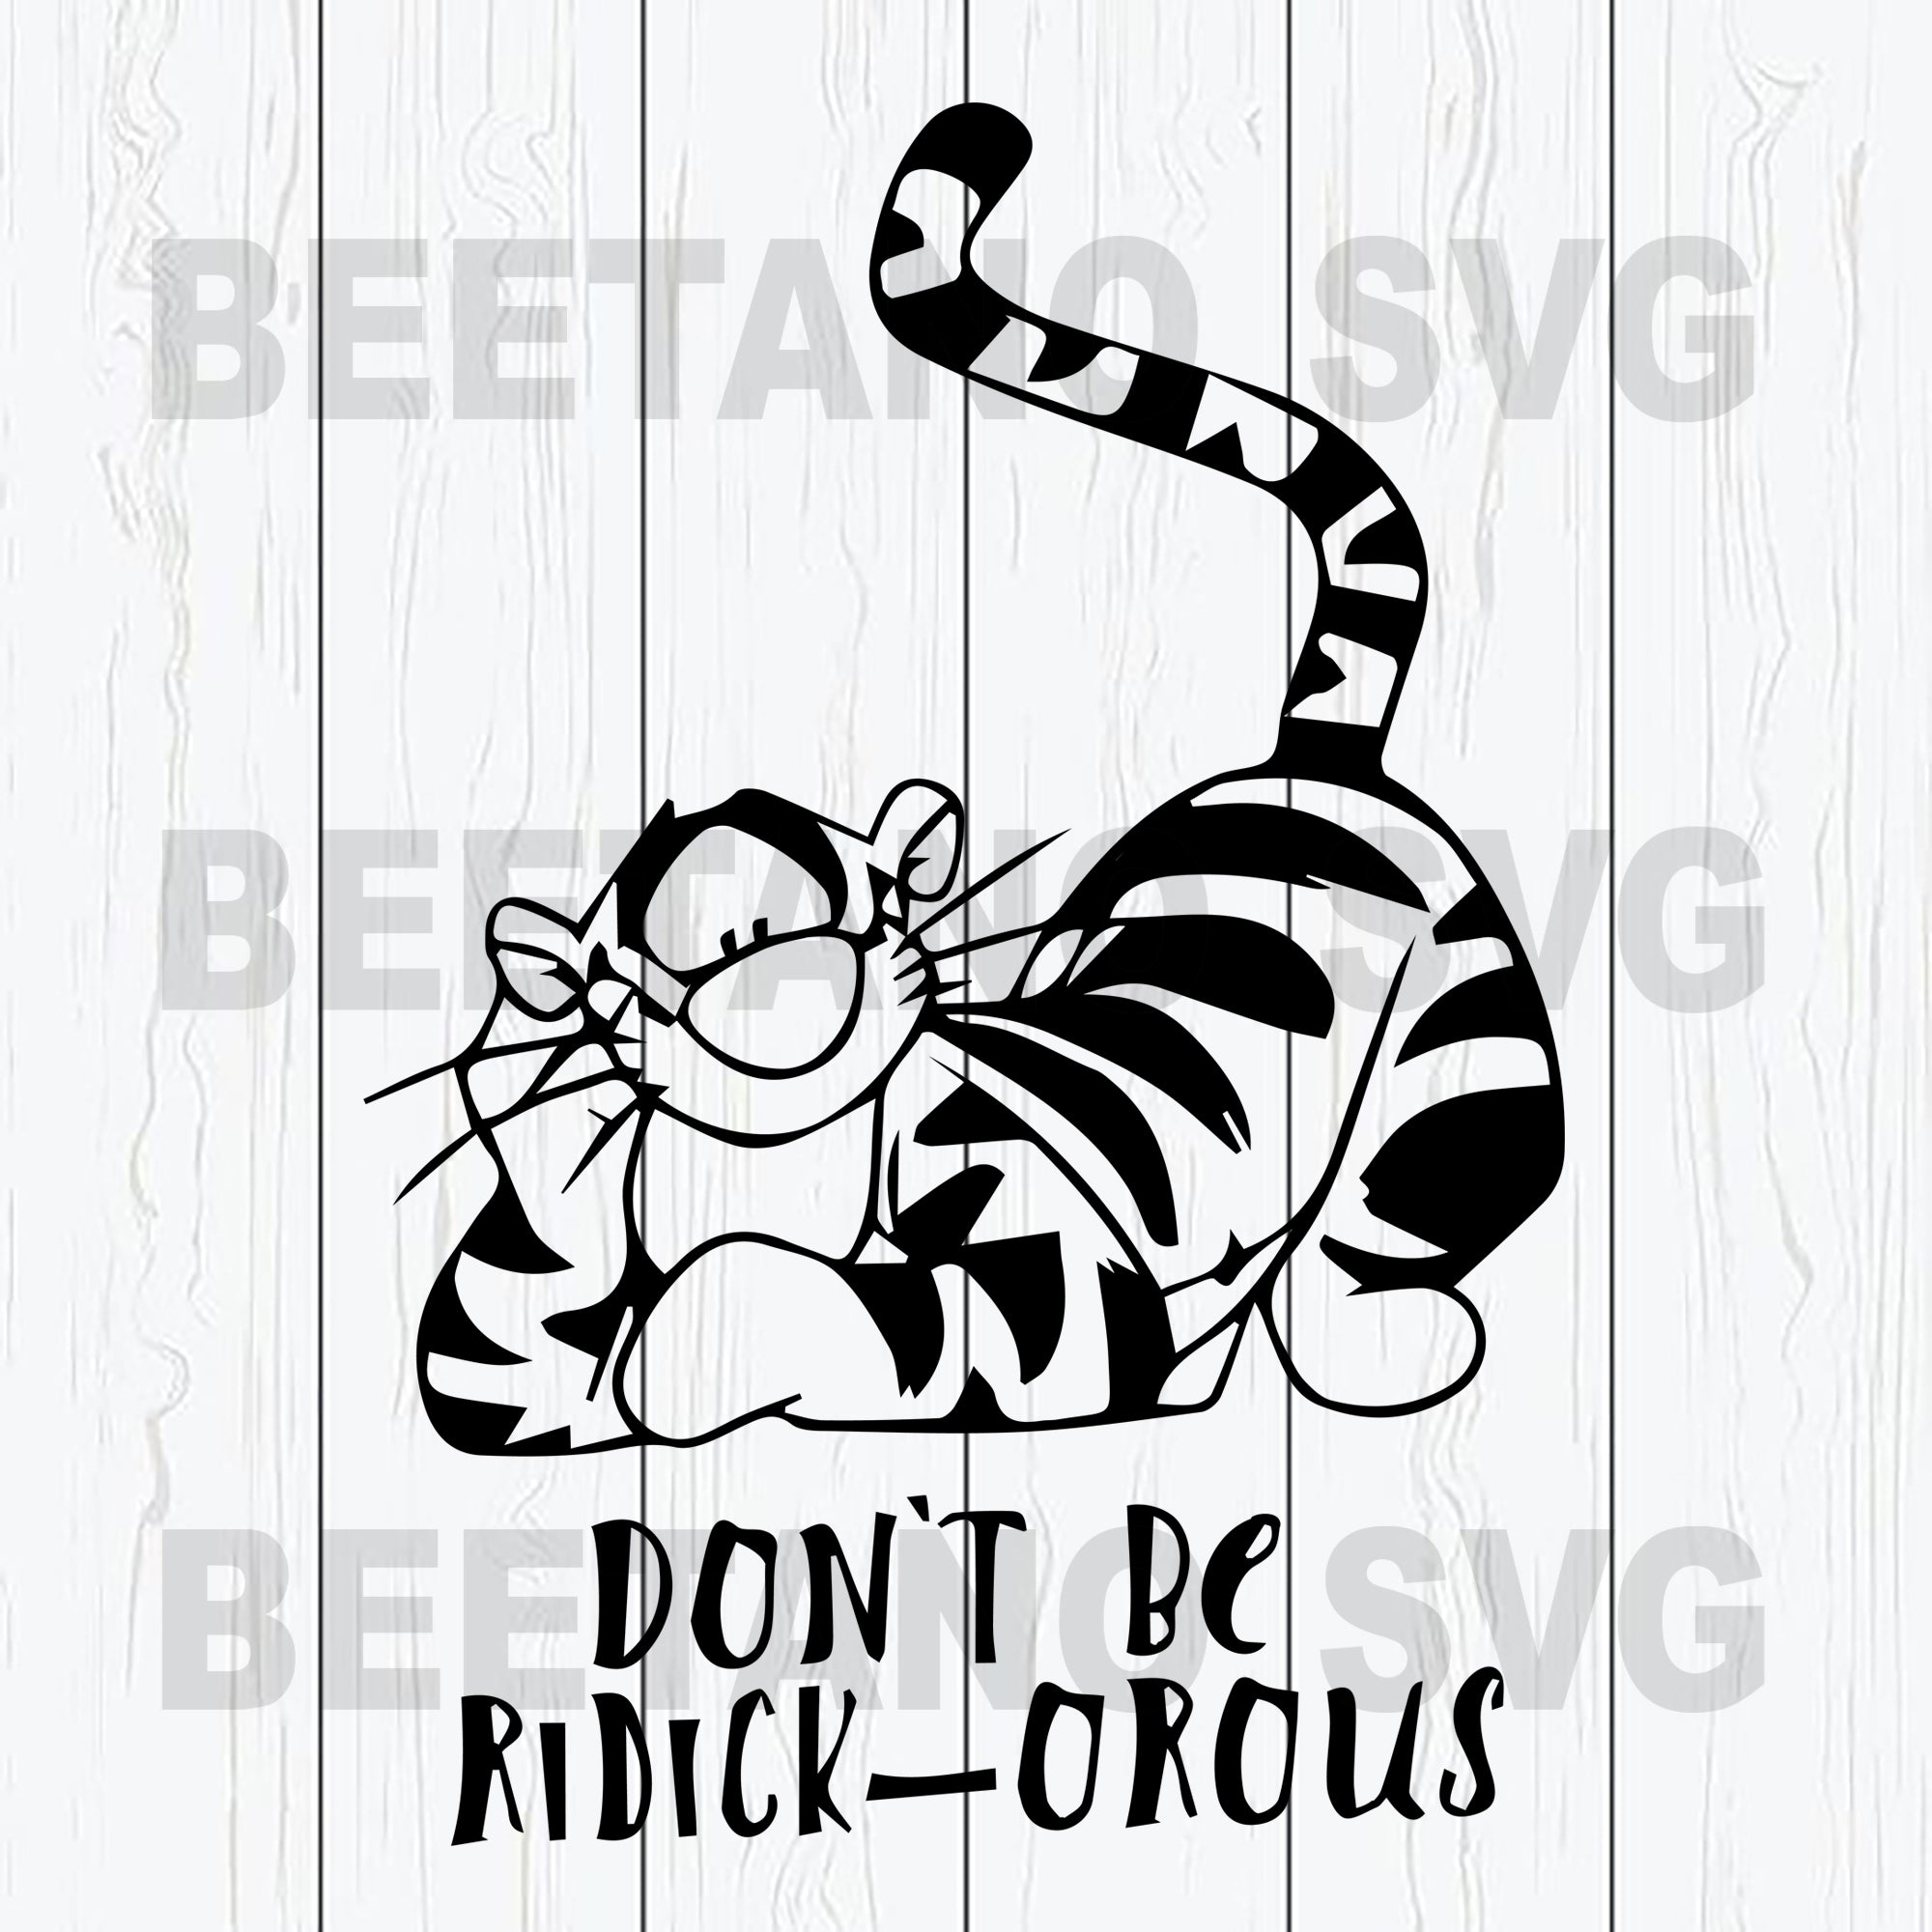 Download Tiger The Winnie Pooh Don T Be Ridickorous Svg Files Tiger Svg Winni Beetanosvg Scalable Vector Graphics